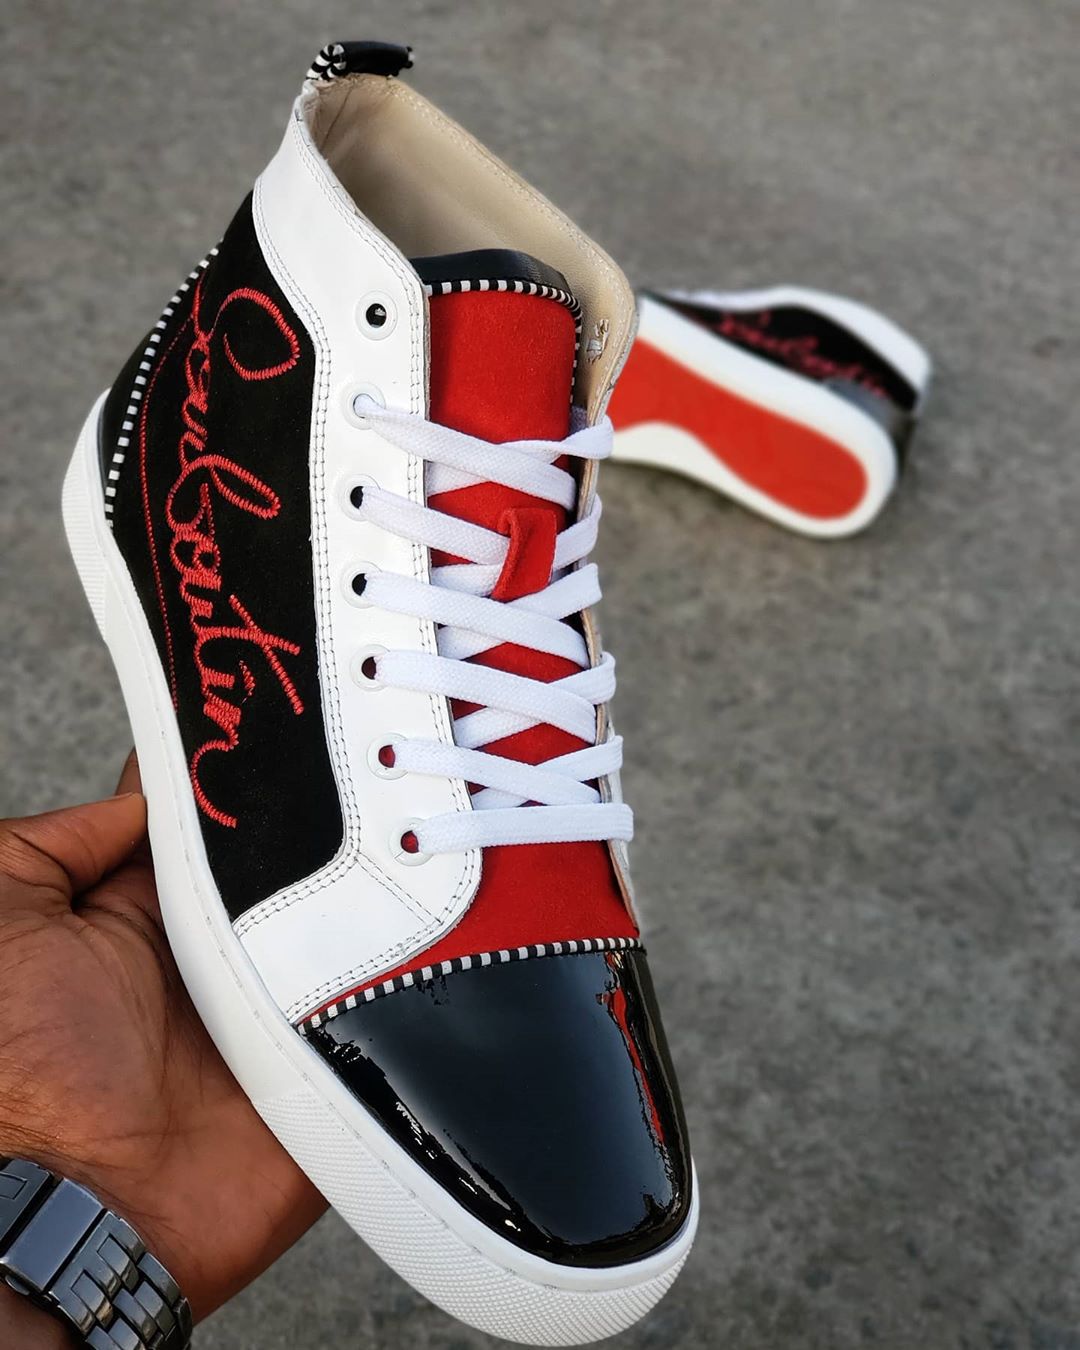 christian louboutin – HollySale USA Classified, Buy Sell Shop Used Item Free